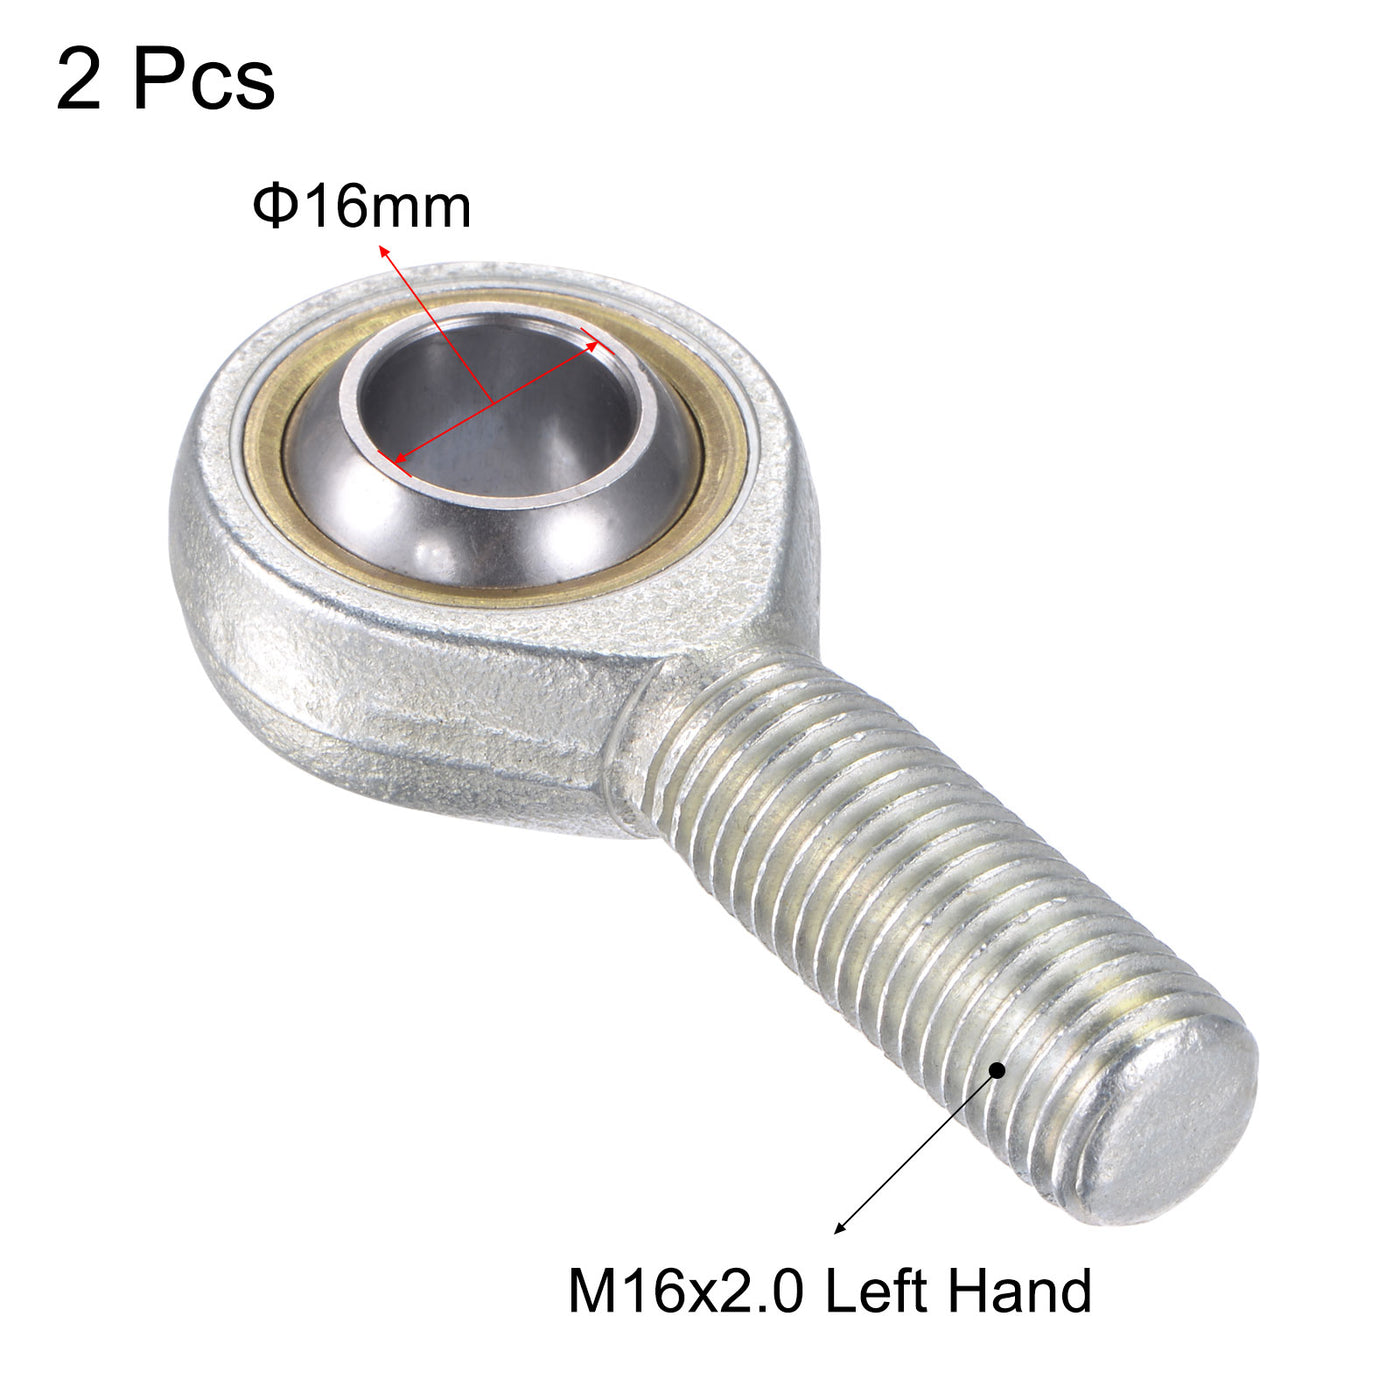 uxcell Uxcell 2pcs SA16TK POSA16 Rod End Bearing 16mm Bore M16x2.0 Left Hand Male Thread